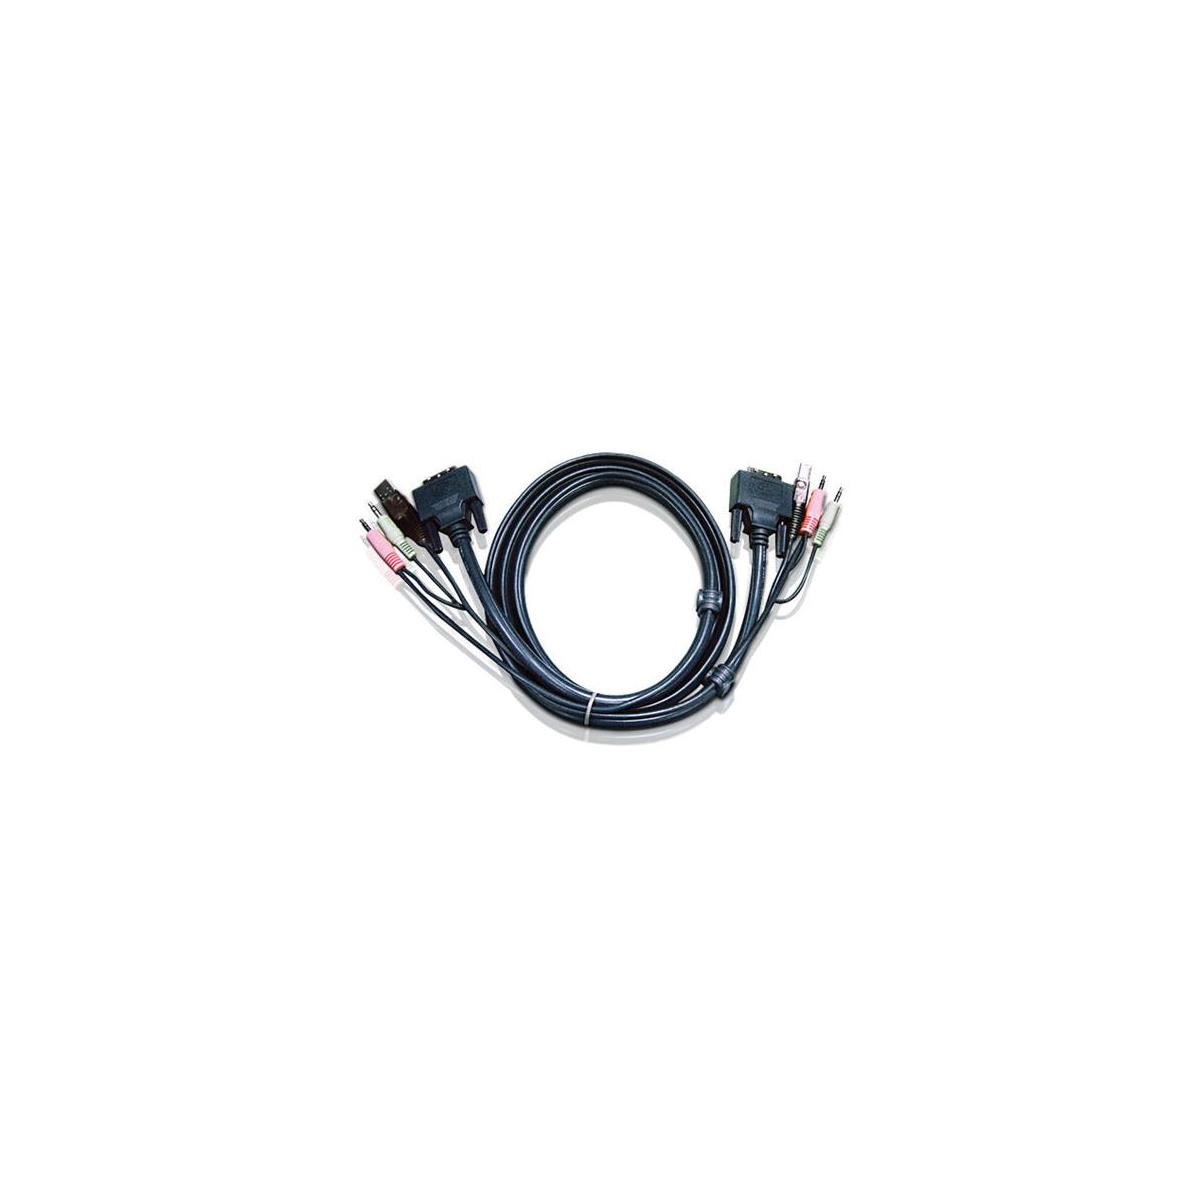 

Aten 2L7D03UI 10' USB DVI-I Single Link Cable for Console and KVM Switches